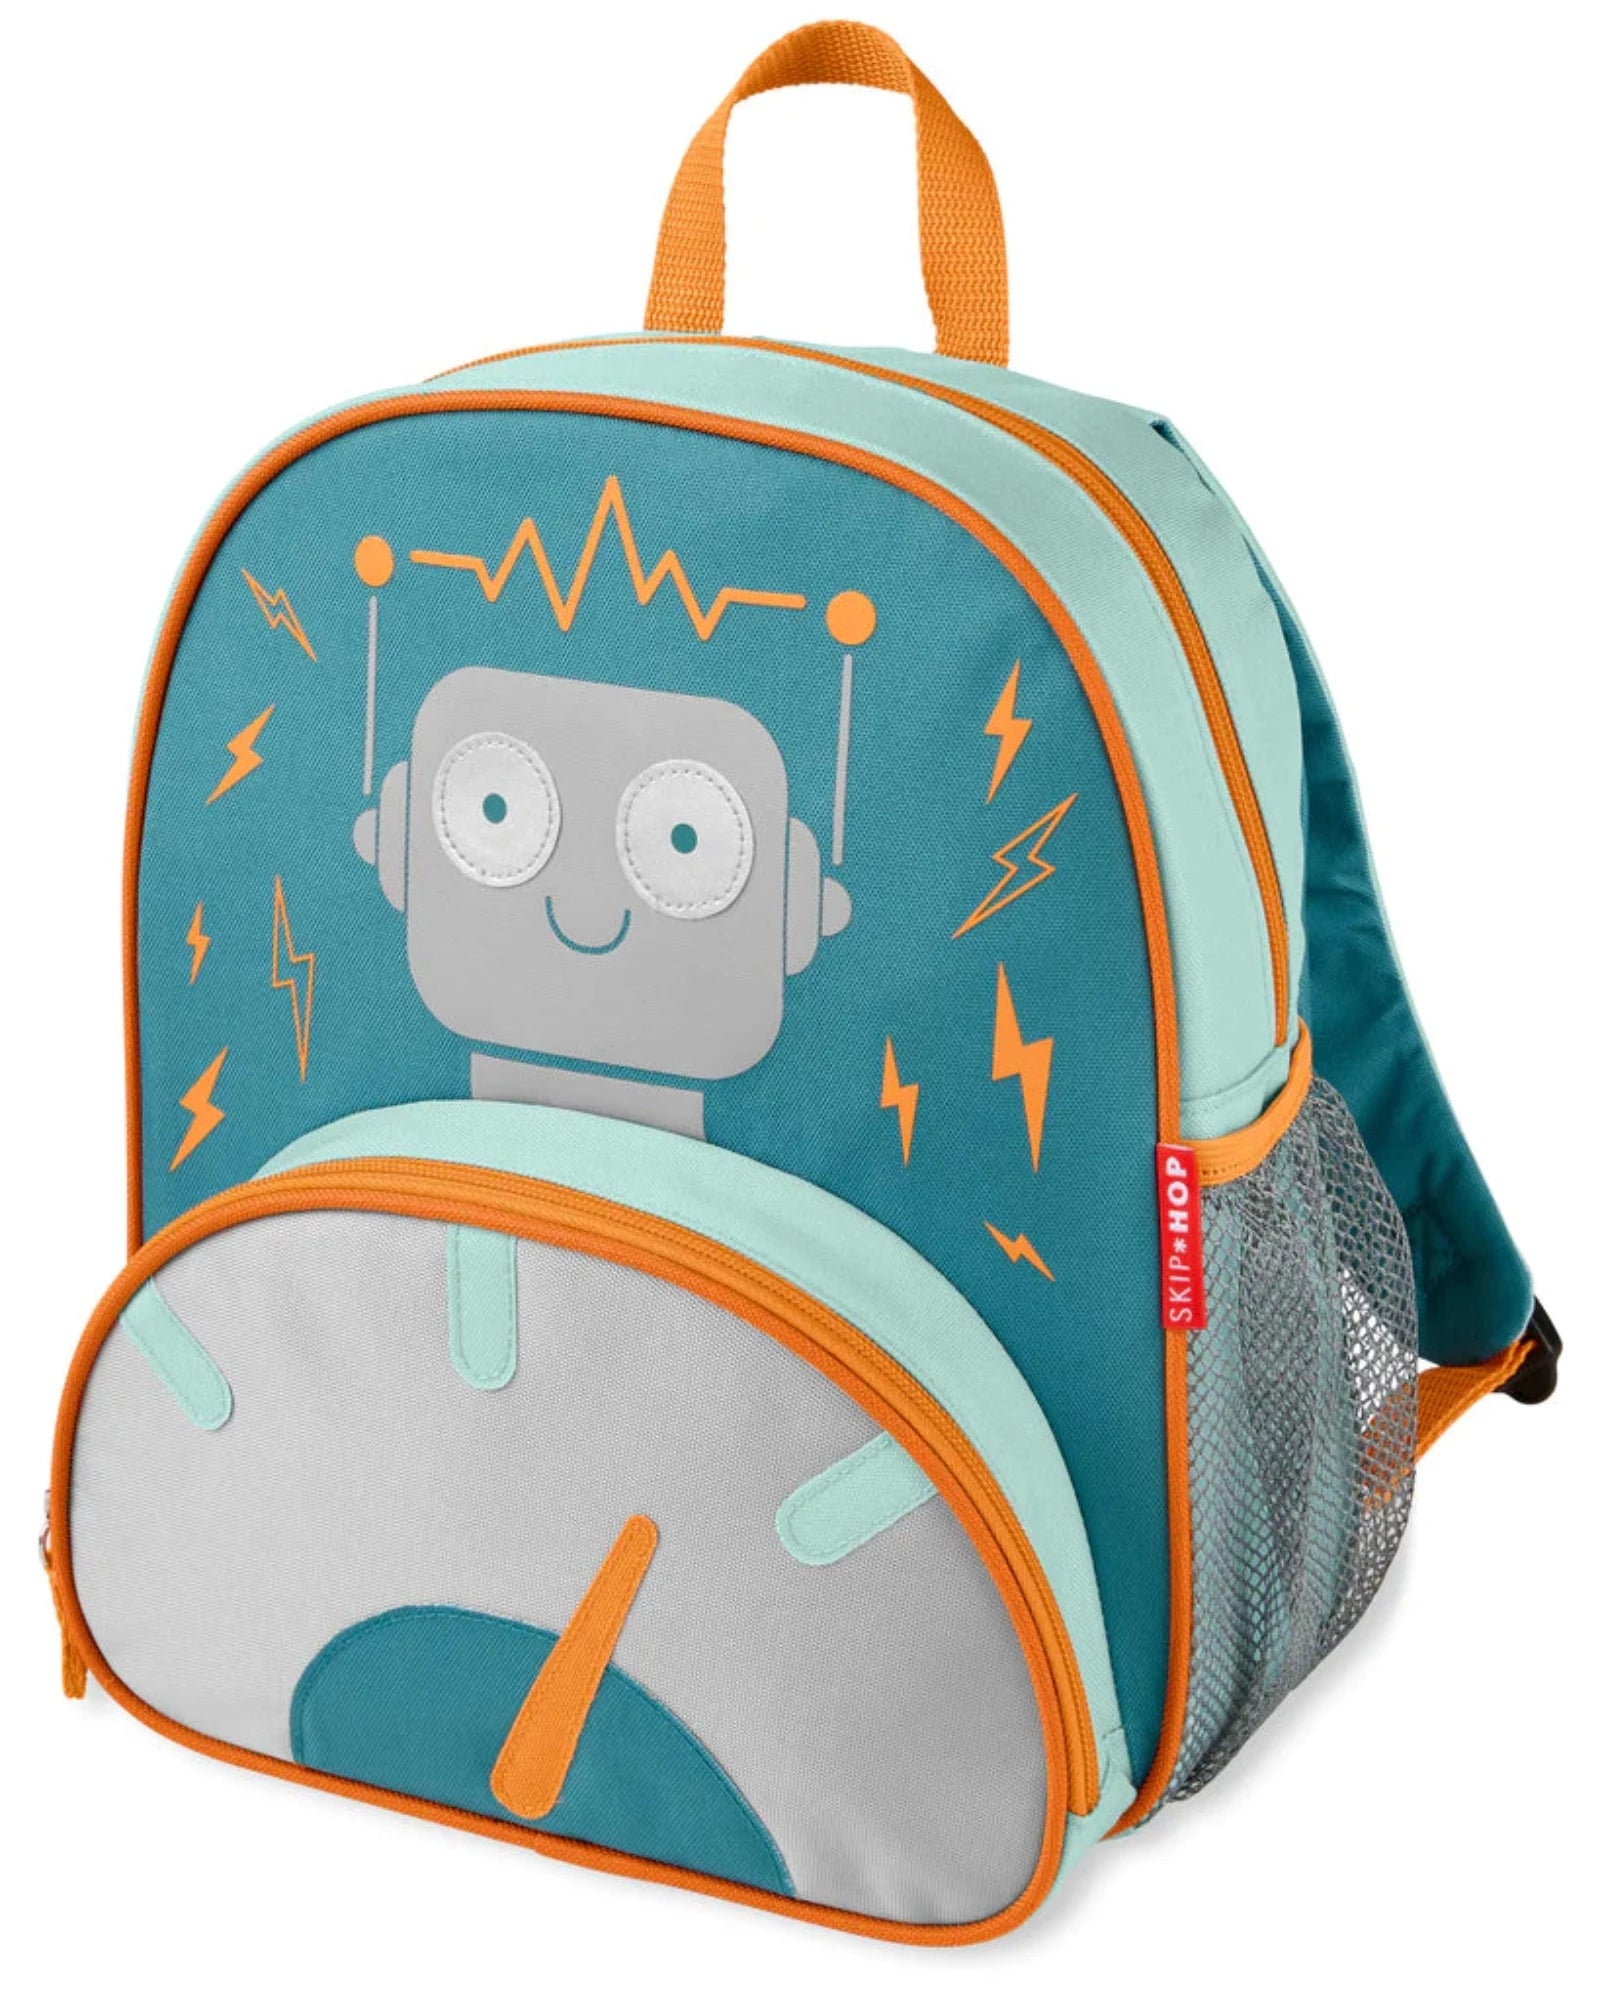 Skip Hop Spark Style Little Kid Backpack - Robot - Tiny Tots Baby Store 